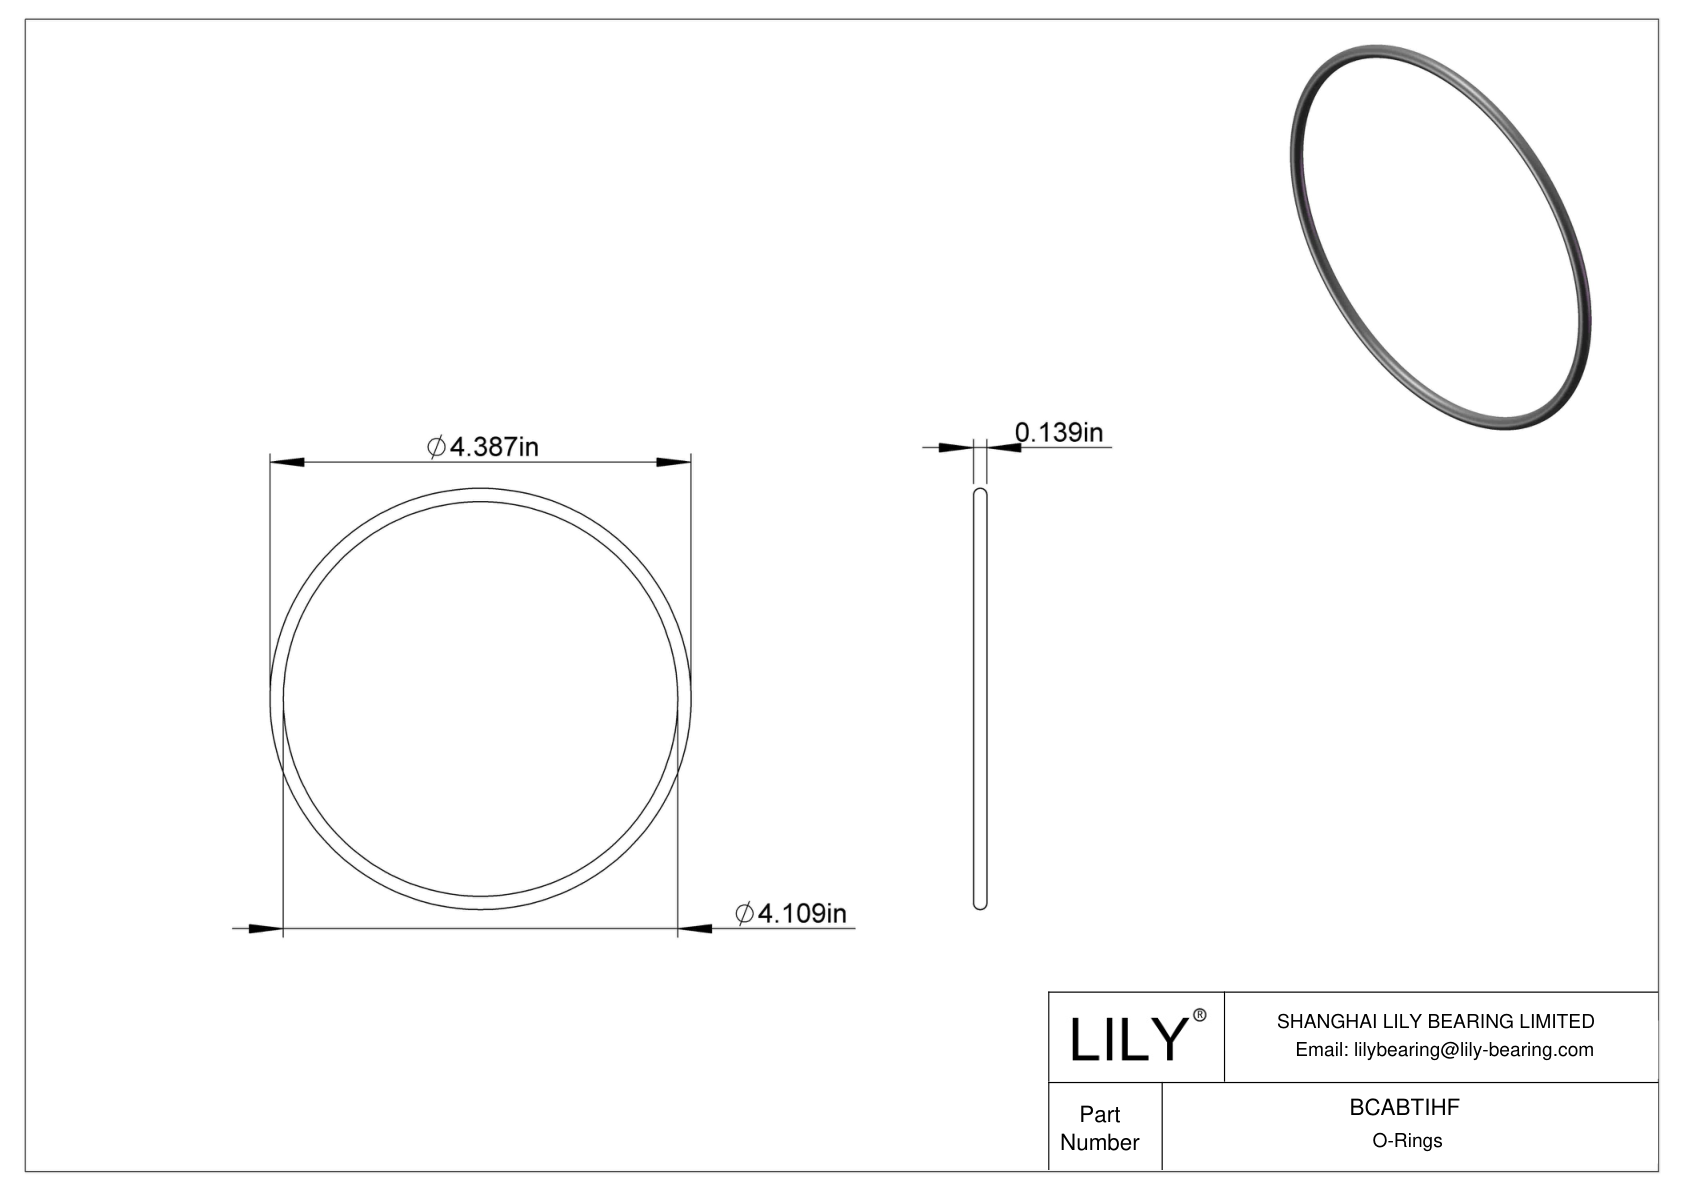 BCABTIHF Chemical Resistant O-rings Round cad drawing